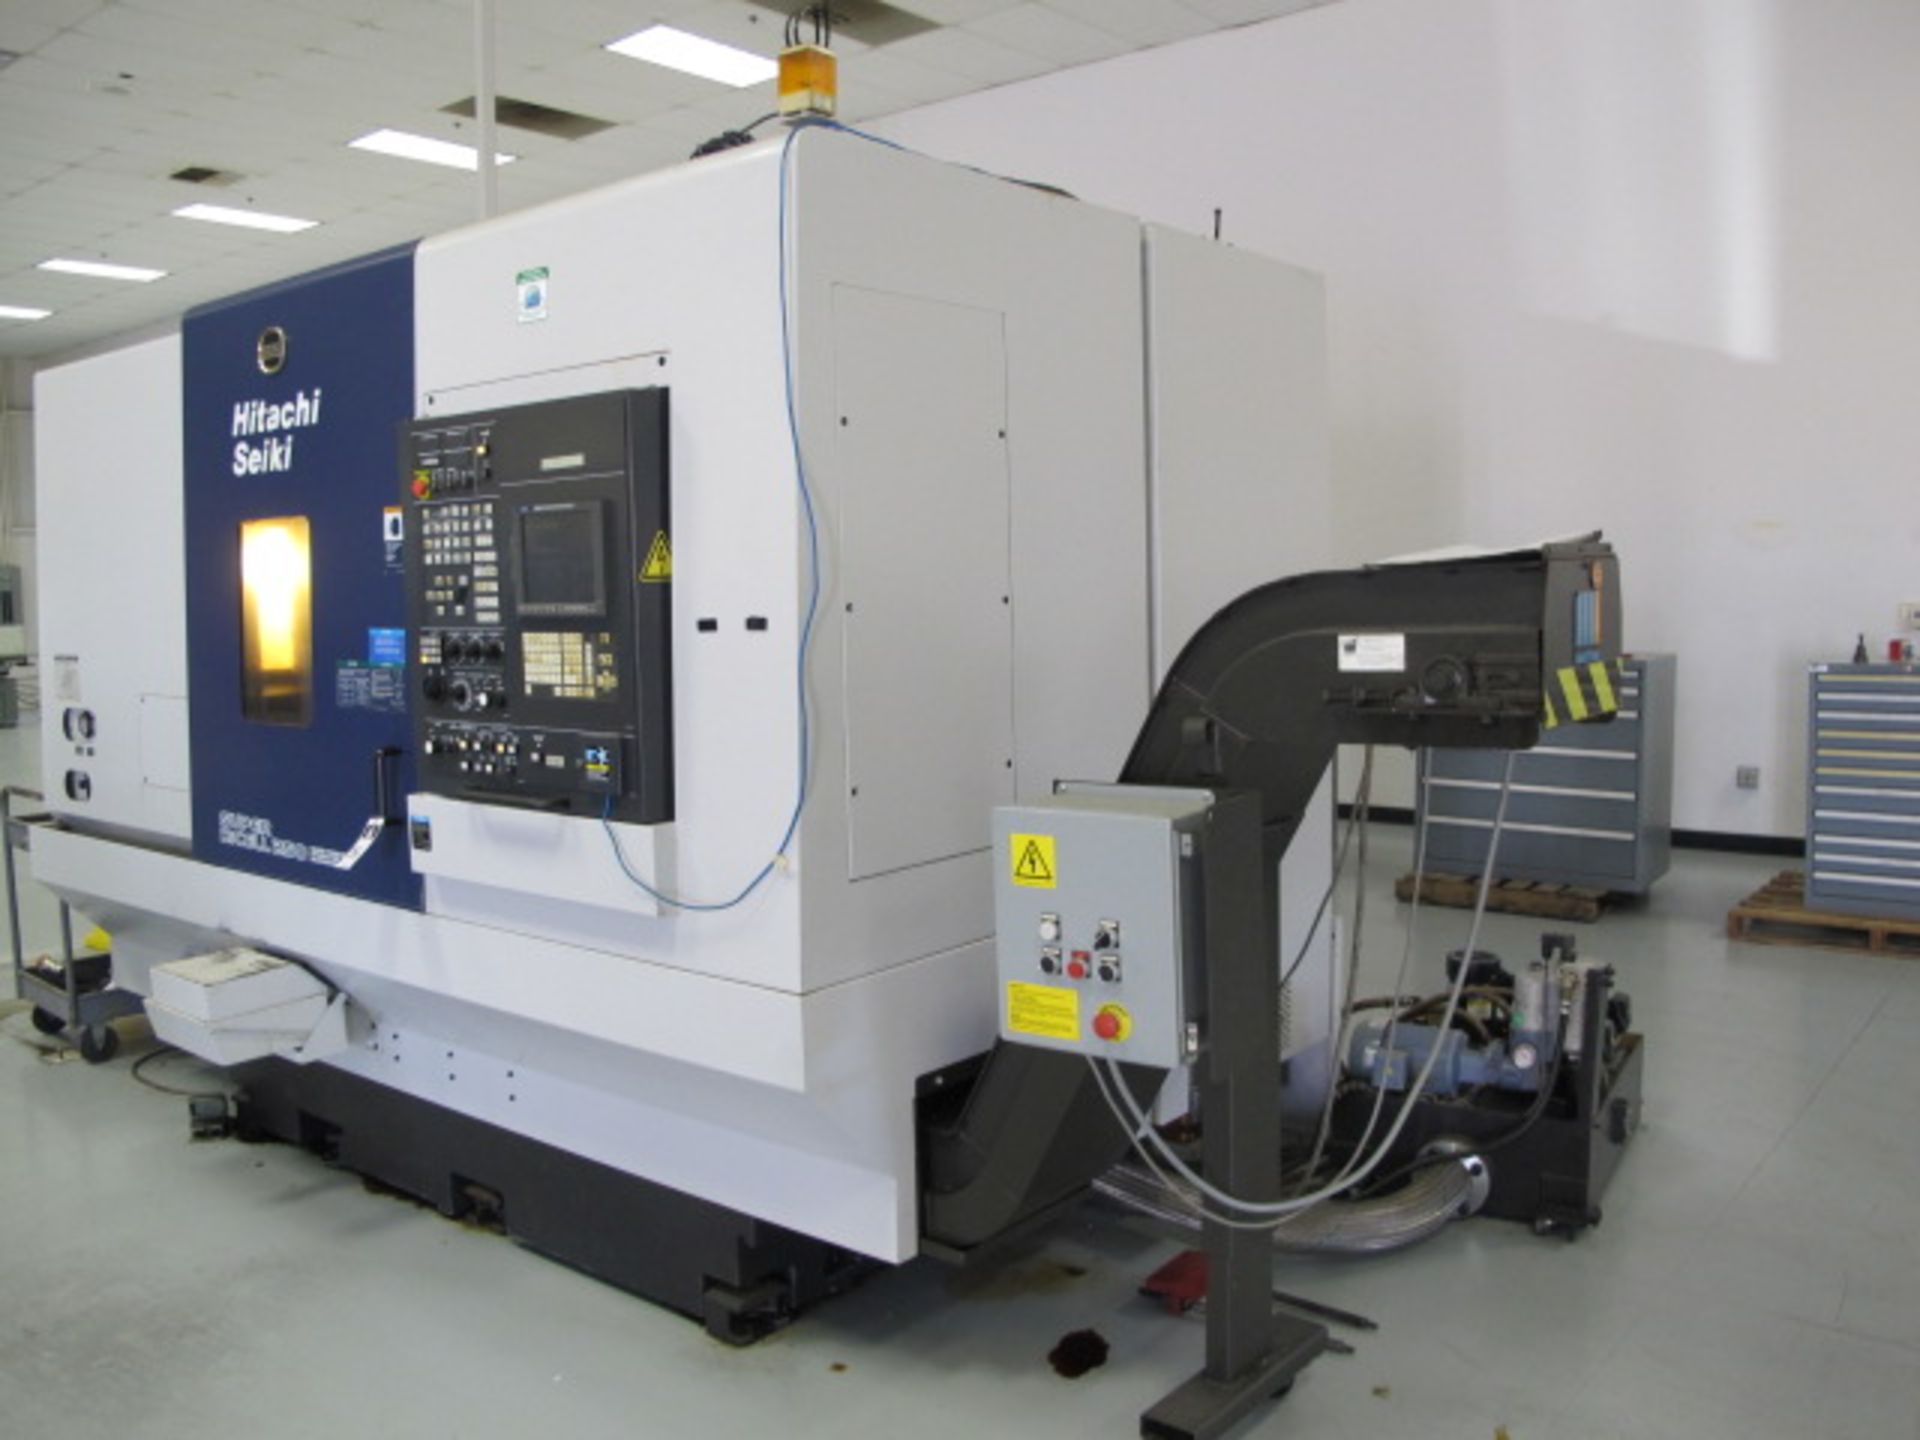 2001 Hitachi Seiki Super HiCell 250 5-Axis Twin Spindle Super Productive Integrated Machining Cell - Image 3 of 19